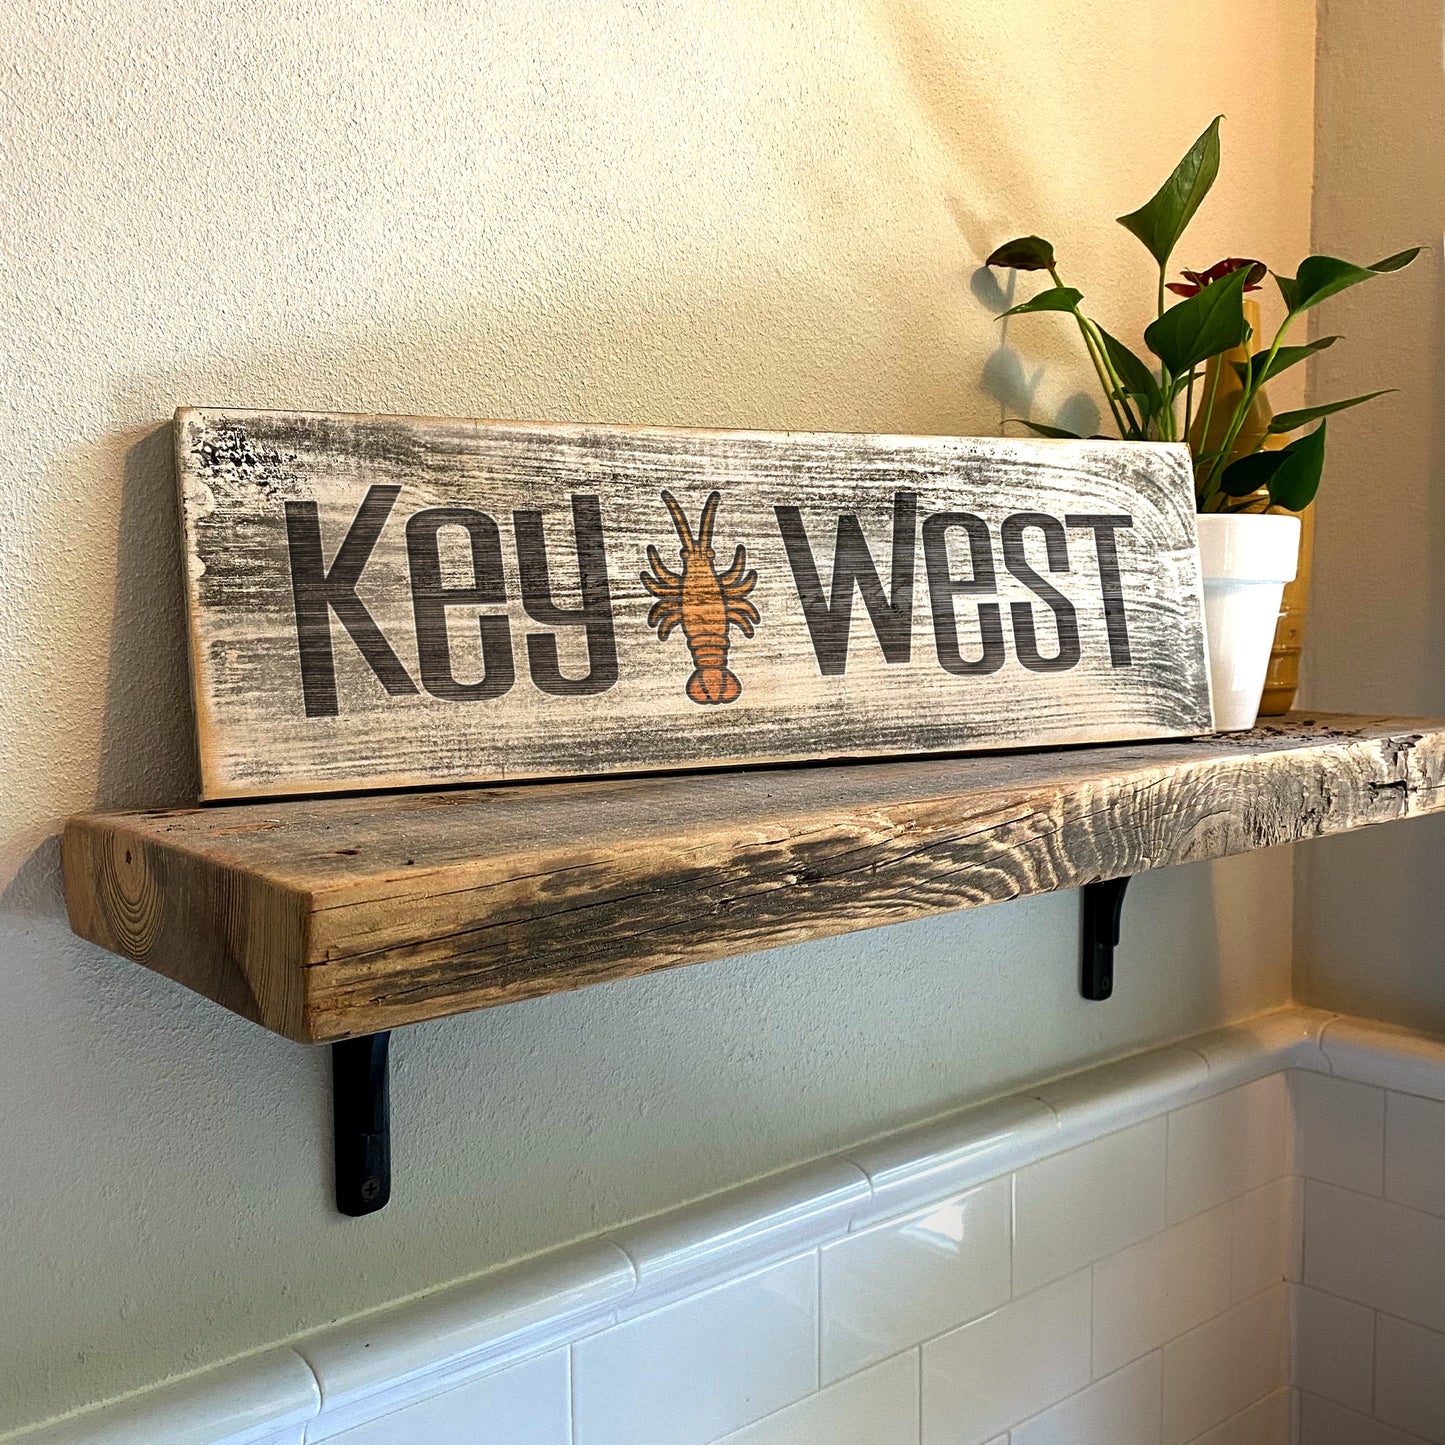 Key West FL - Handcrafted Artisan Wood Sign